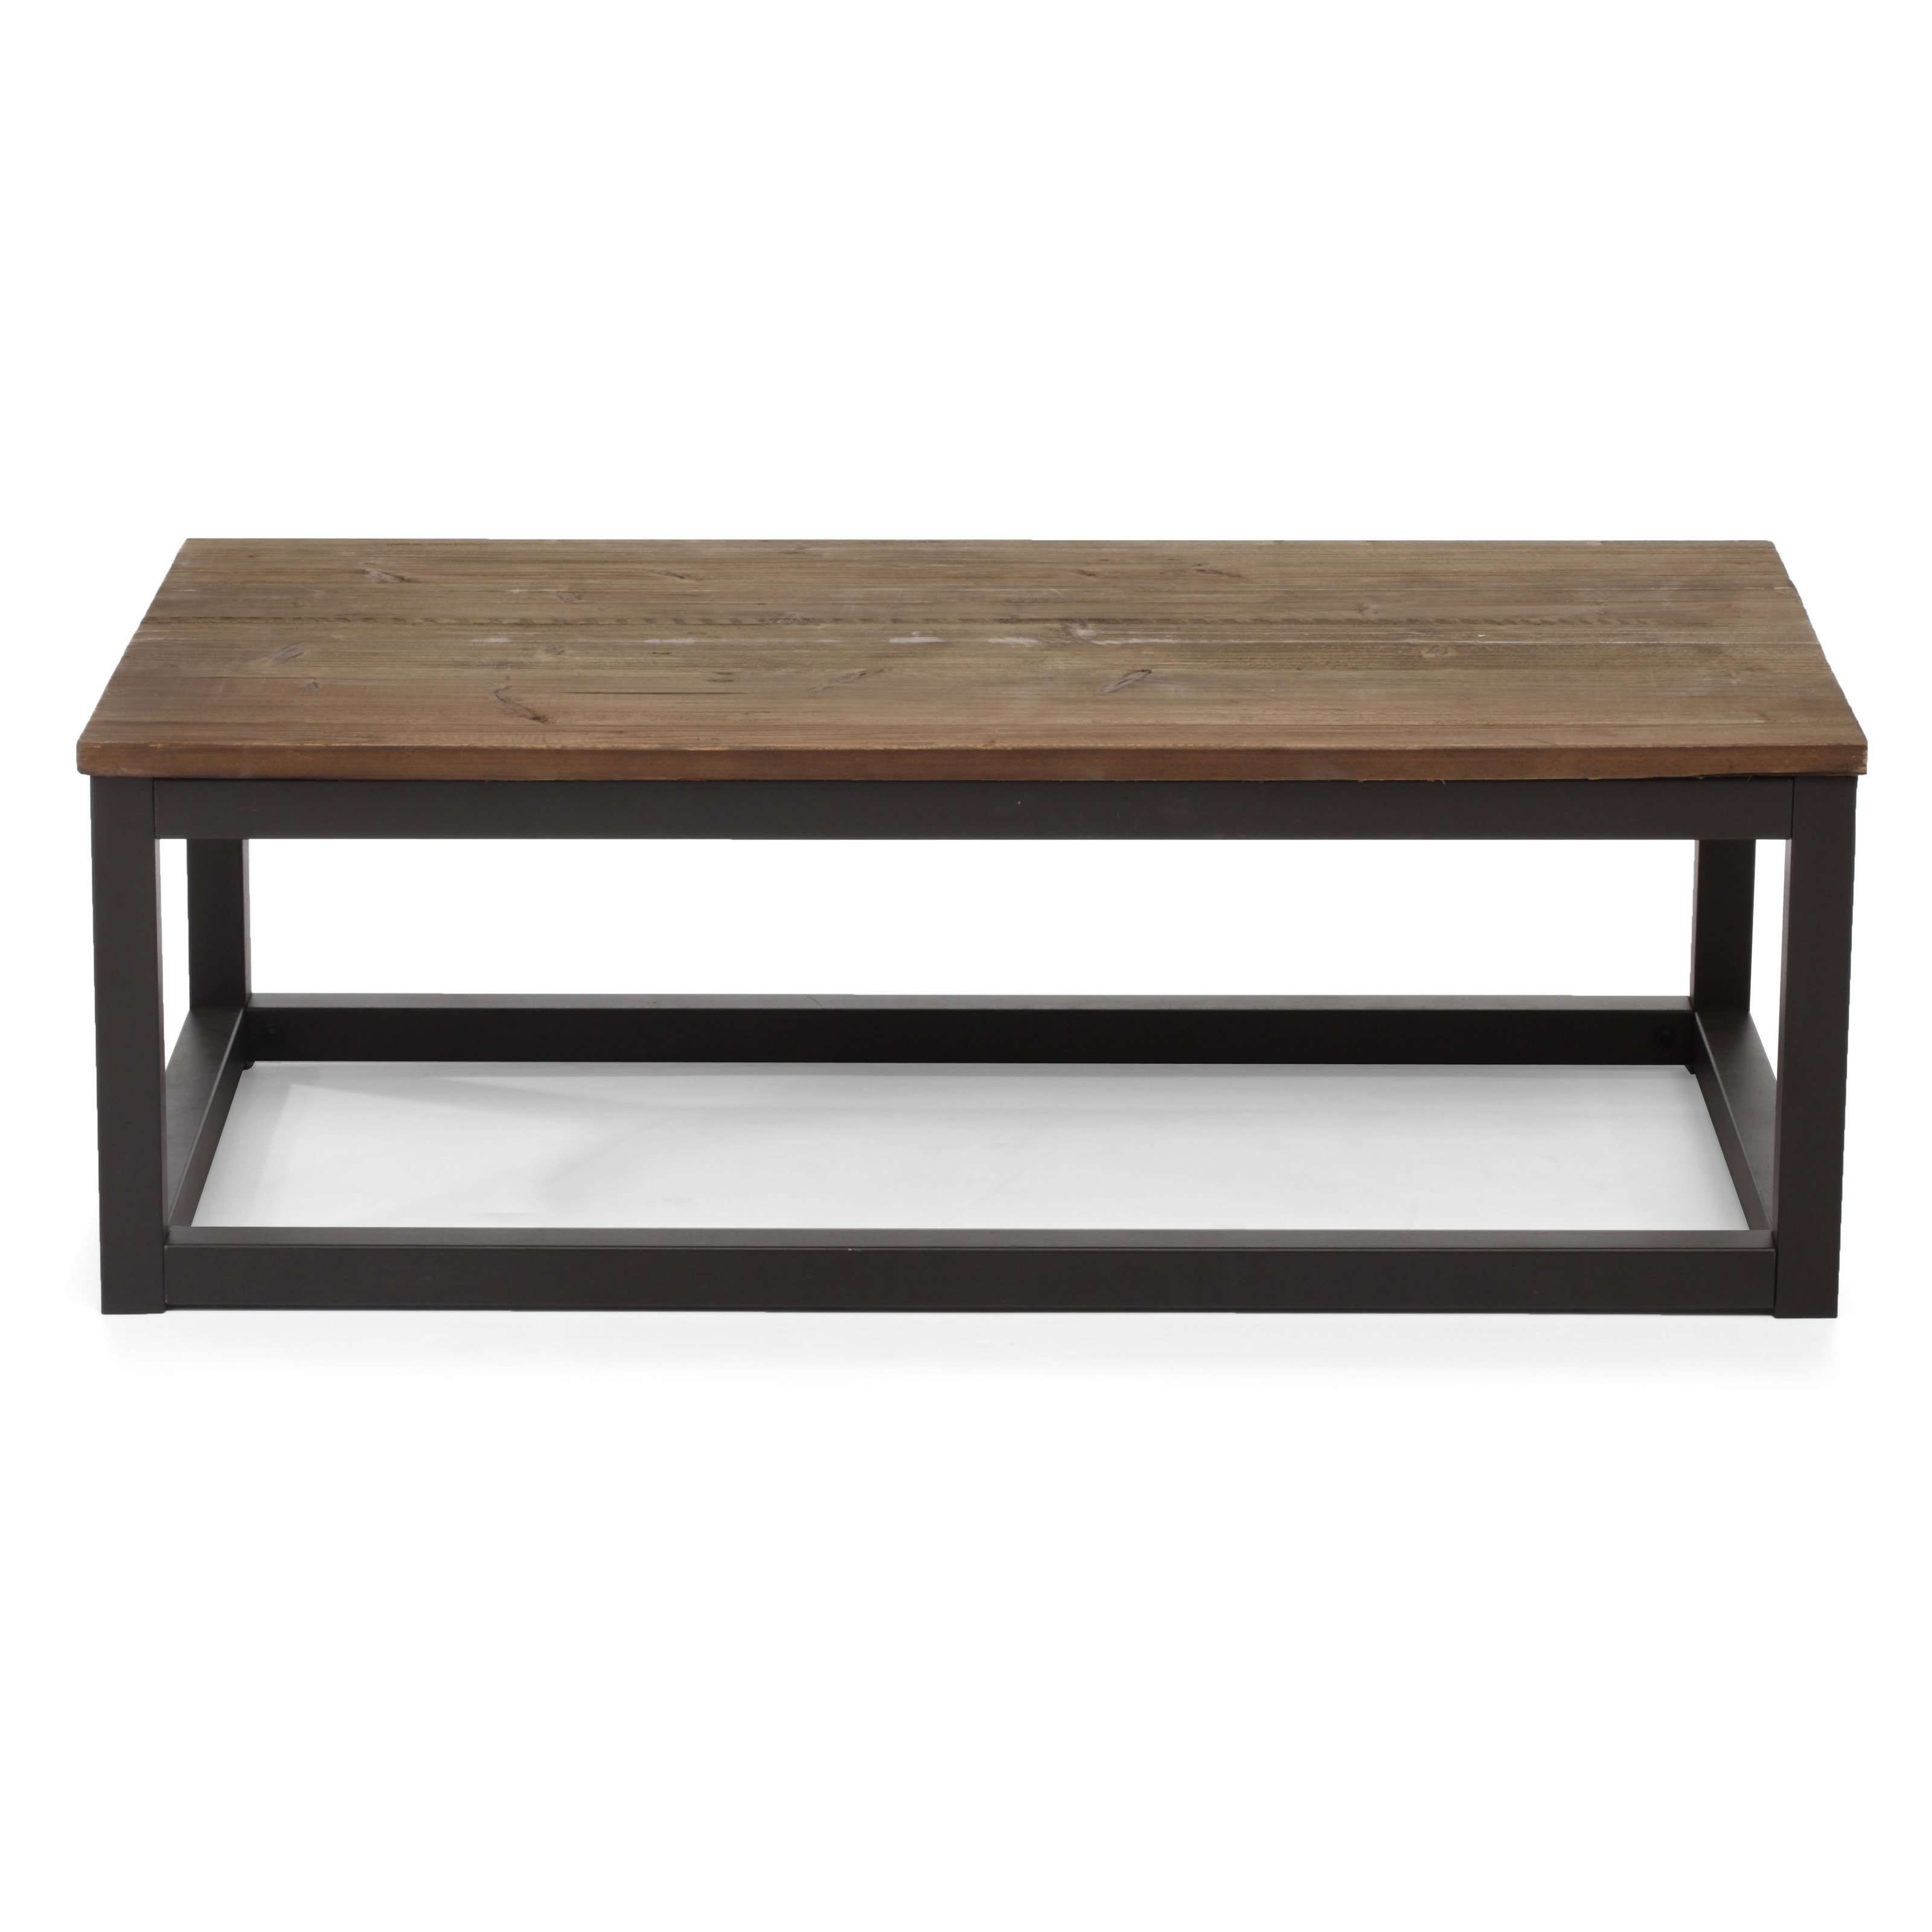 Zuo Modern Civic Center Long Coffee Table – Distressed Natural Regarding Widely Used Long Coffee Tables (View 17 of 20)